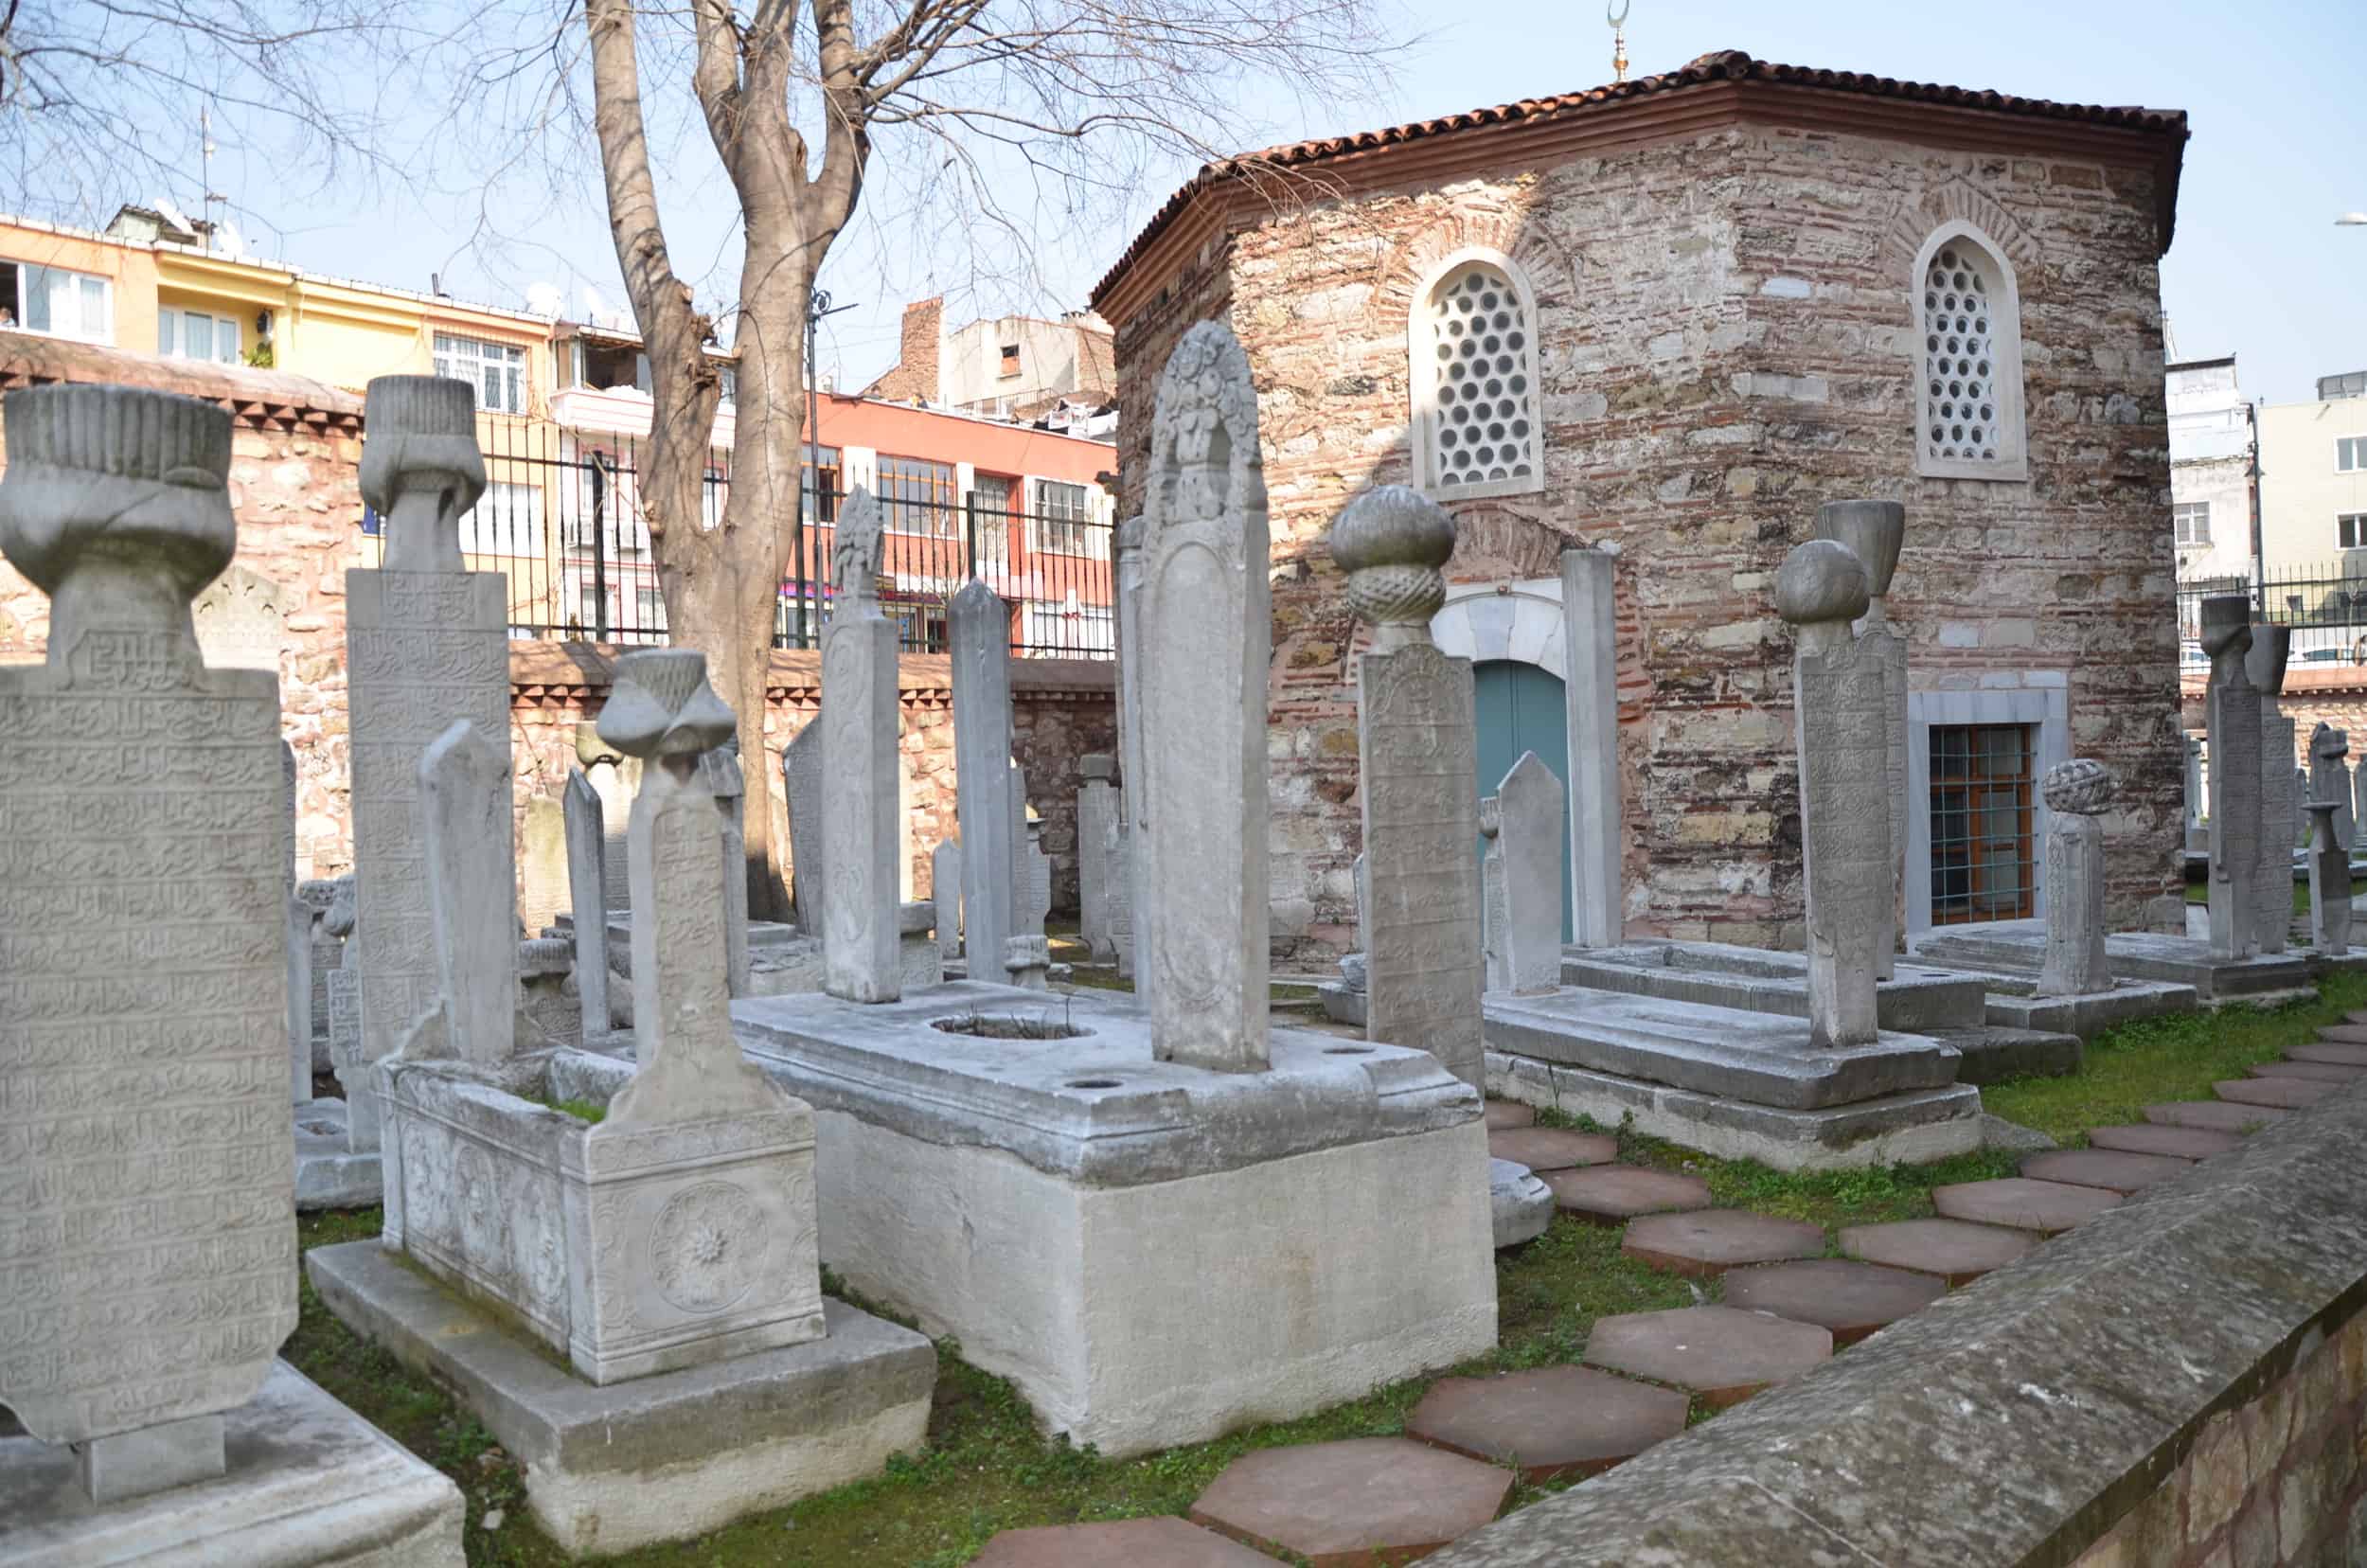 Cemetery with the tomb of Hüseyin Ağa (right)